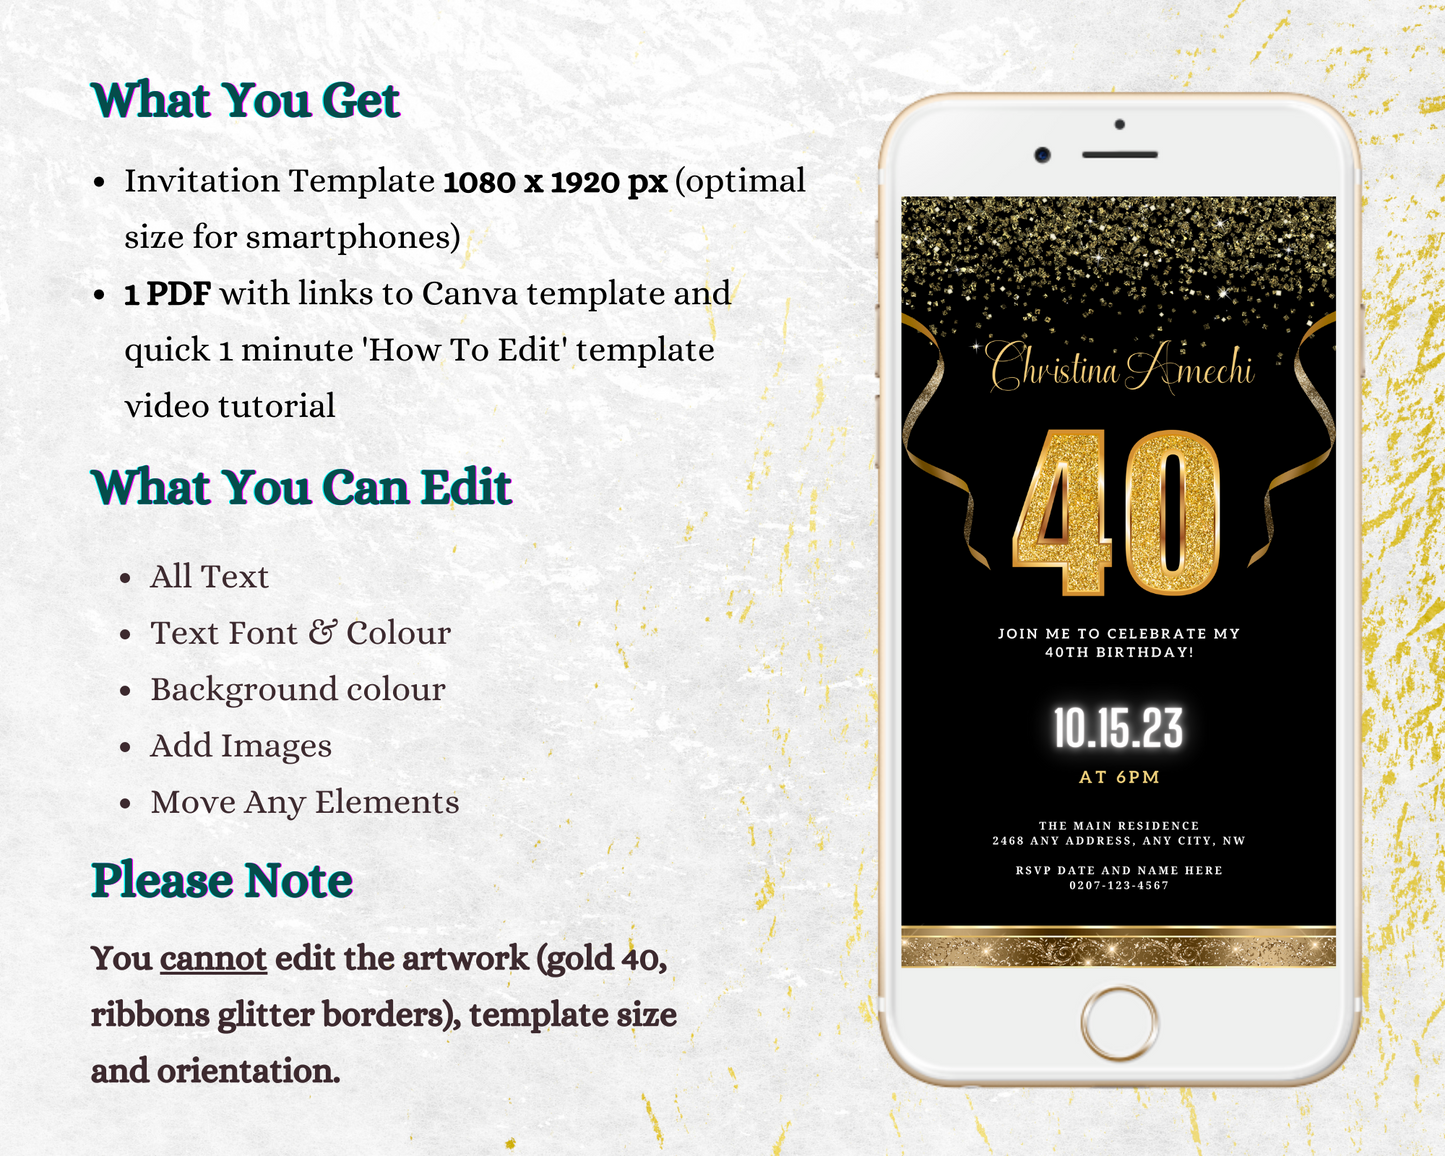 Customizable Digital Black Gold Confetti 40th Birthday Evite displayed on a smartphone screen with gold text and decorative elements.